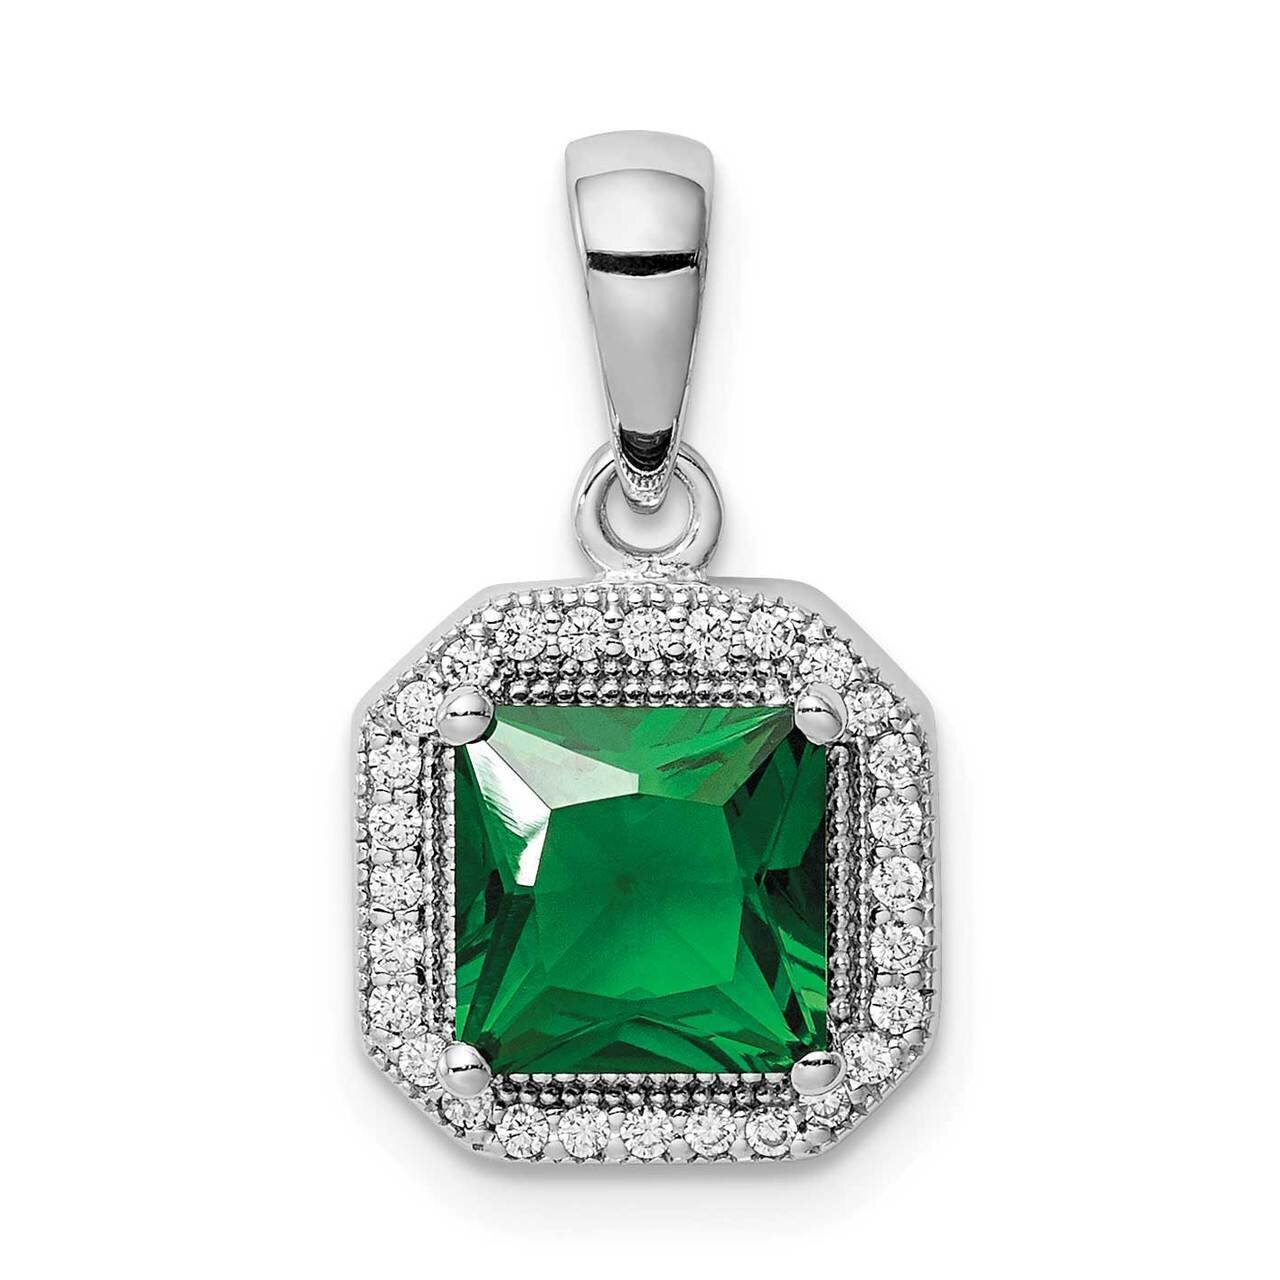 Green & Clear CZ Diamond Pendant Sterling Silver Rhodium Plated QP5265MAY